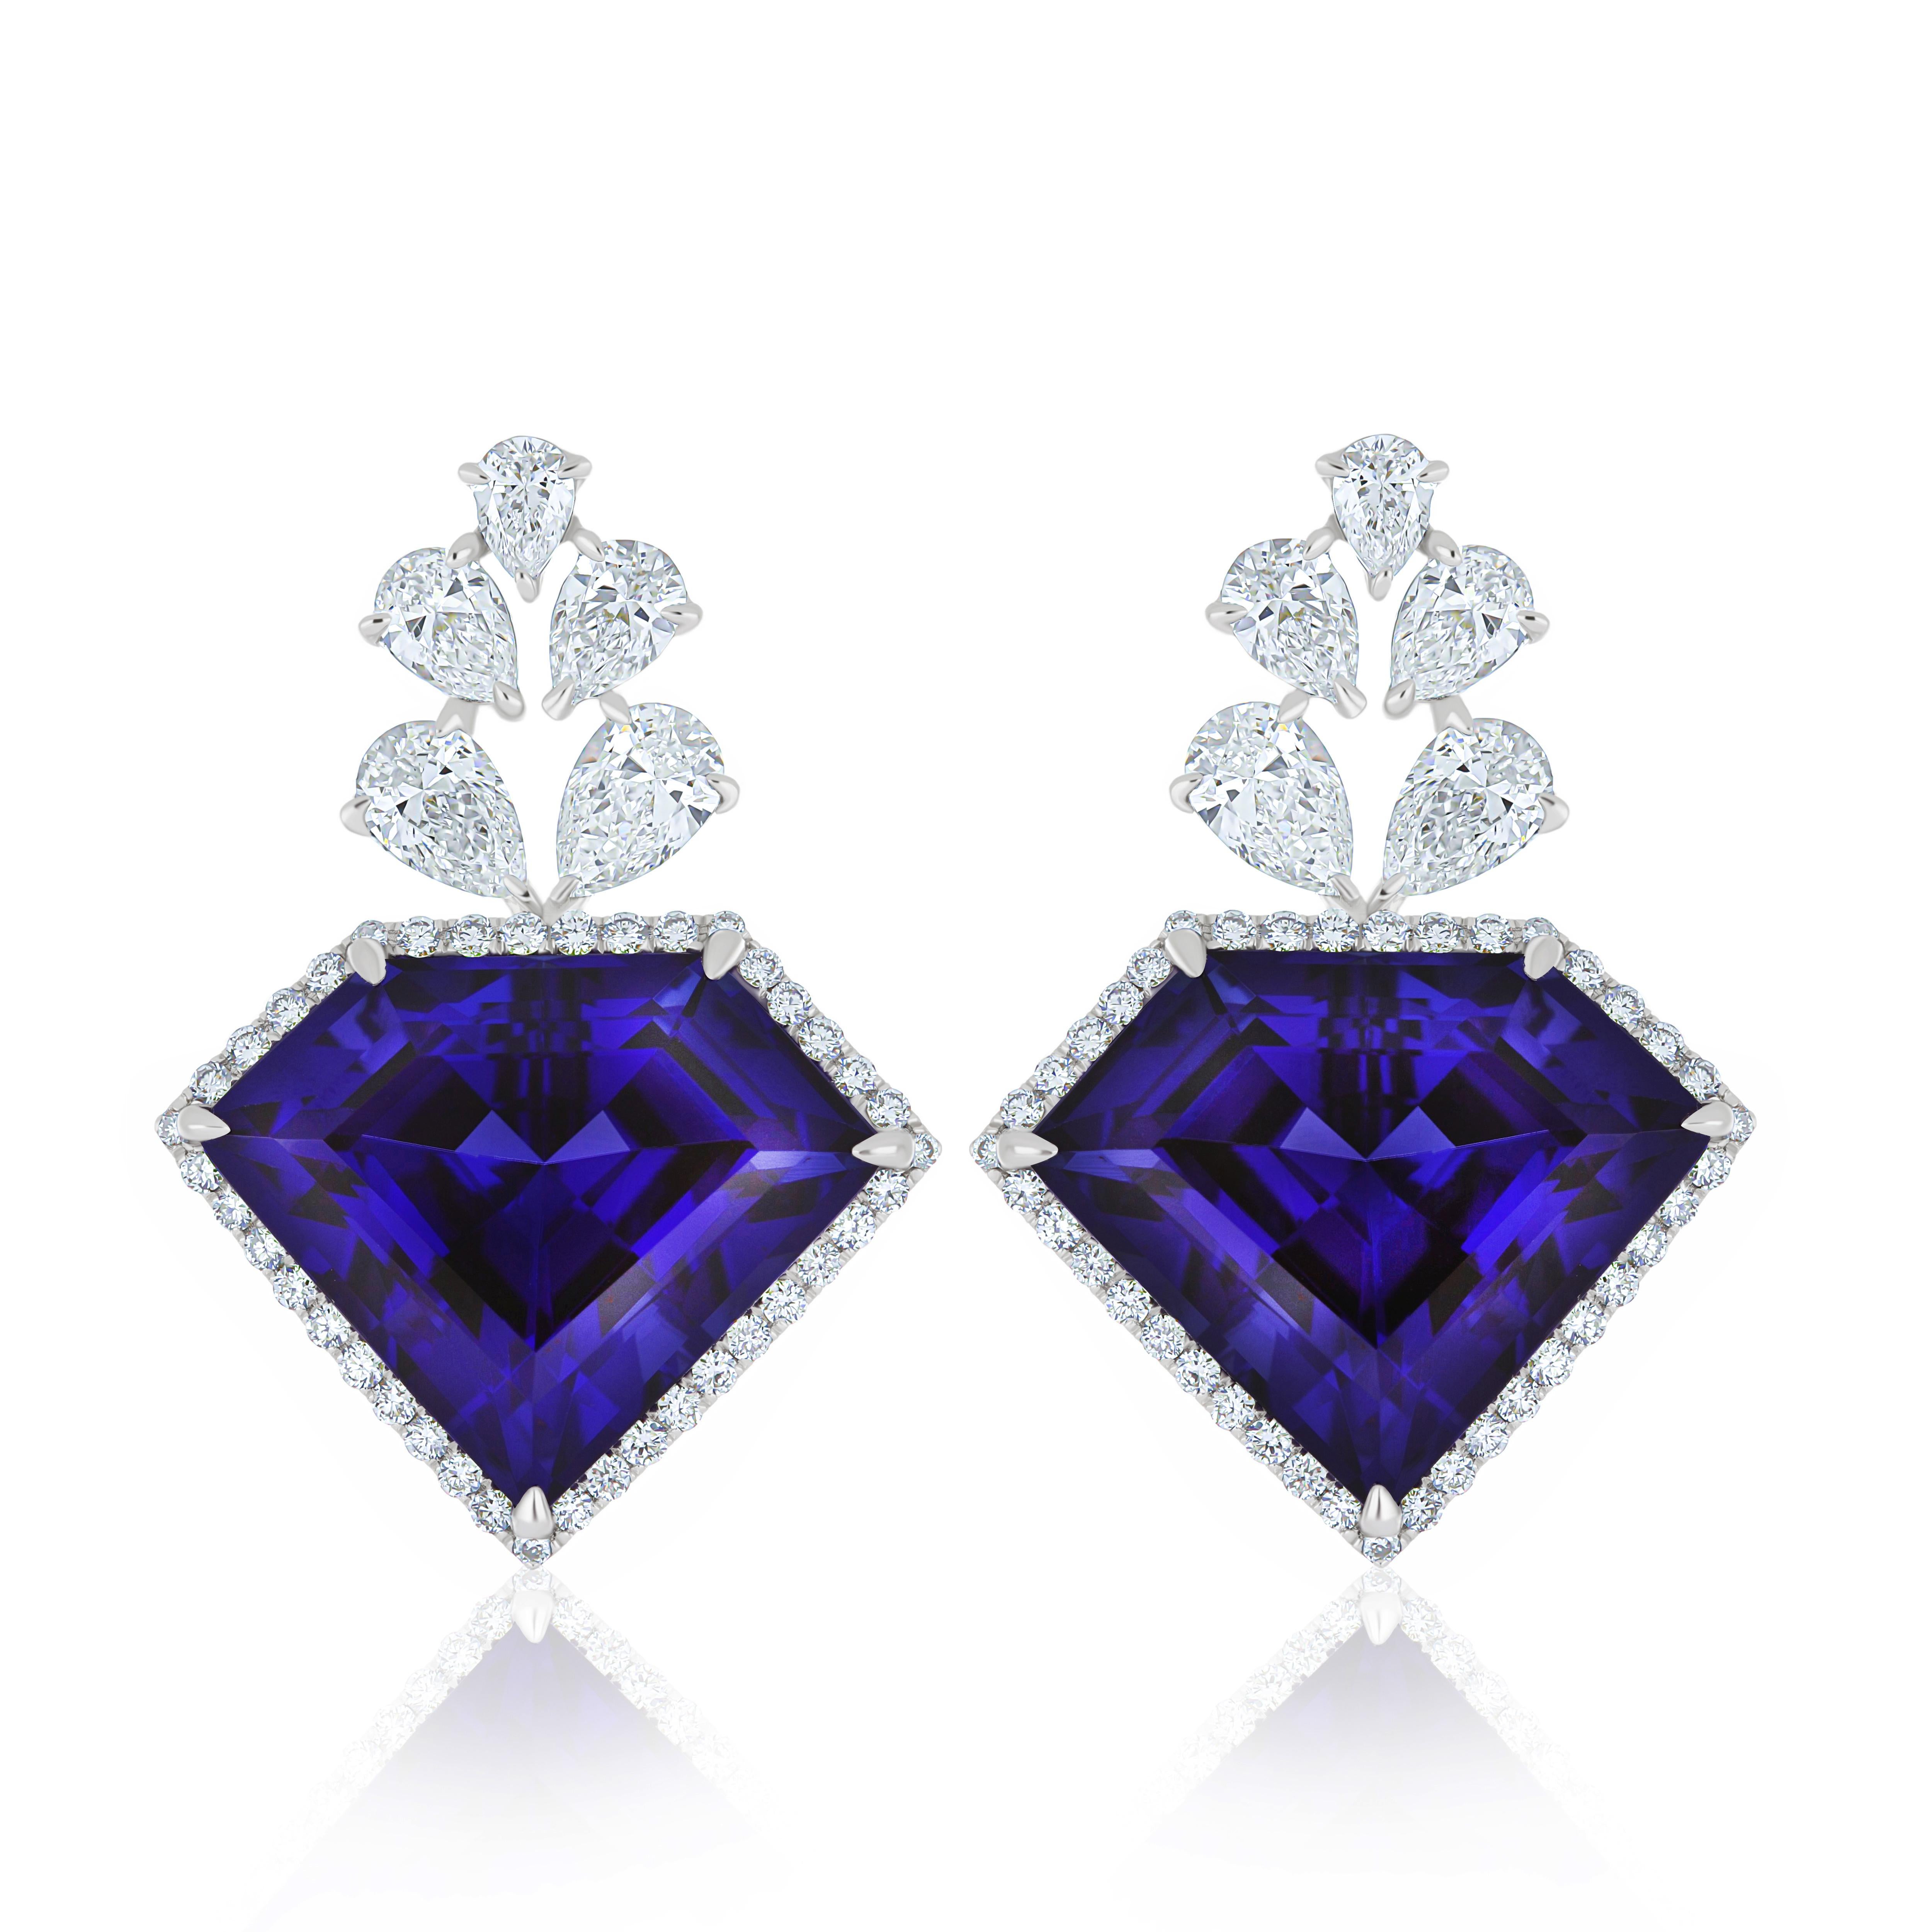 Elegant and Exquisitely Detailed White Gold Earring, with 24.00 ct's (approx.) Tanzanite Exquisitely cut in Unique Diamond Shape accented with micro pave Diamonds, weighing approx. 3.05 ct's (approx.). total carat weight. Beautifully Hand-Crafted